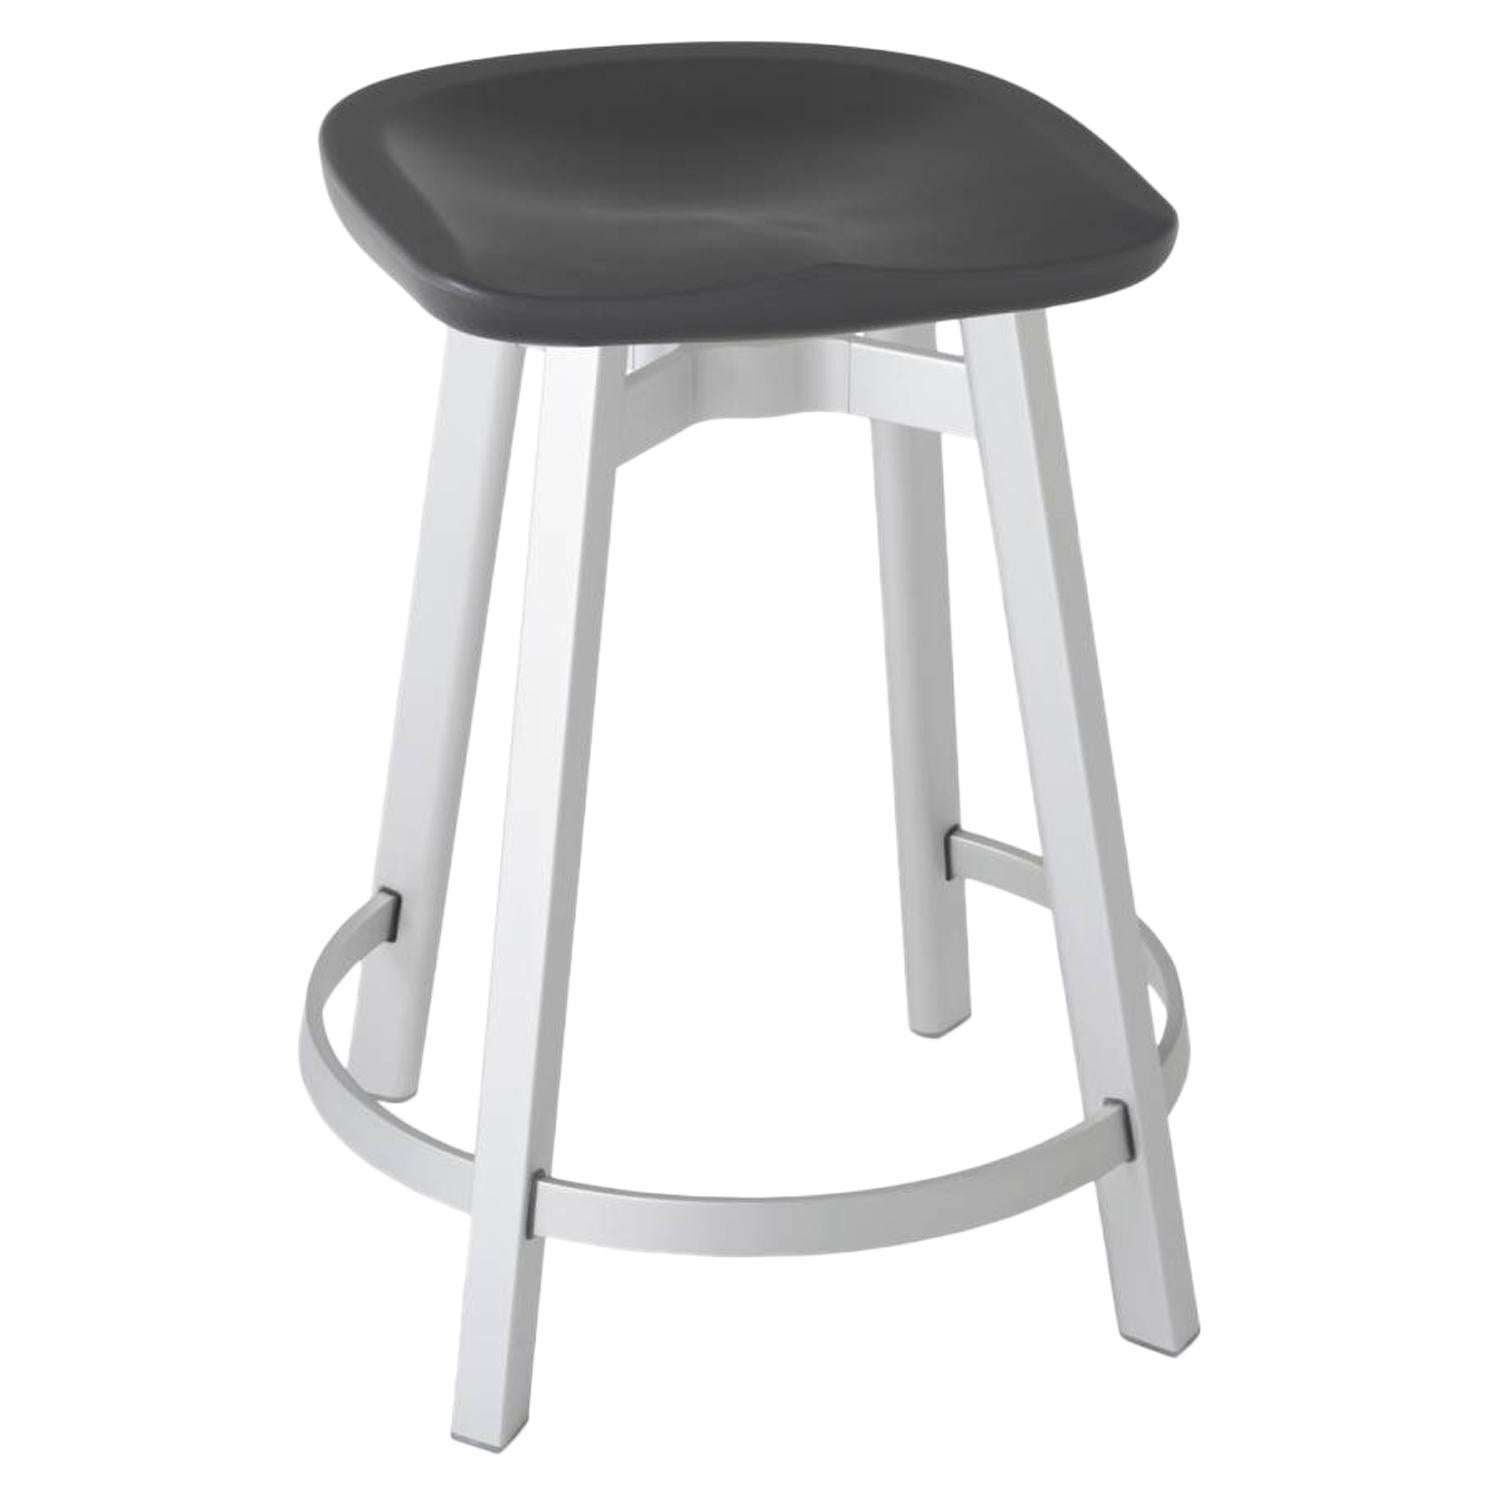 Emeco Su Counter Stool in Natural Aluminum with Charcoal Seat by Nendo